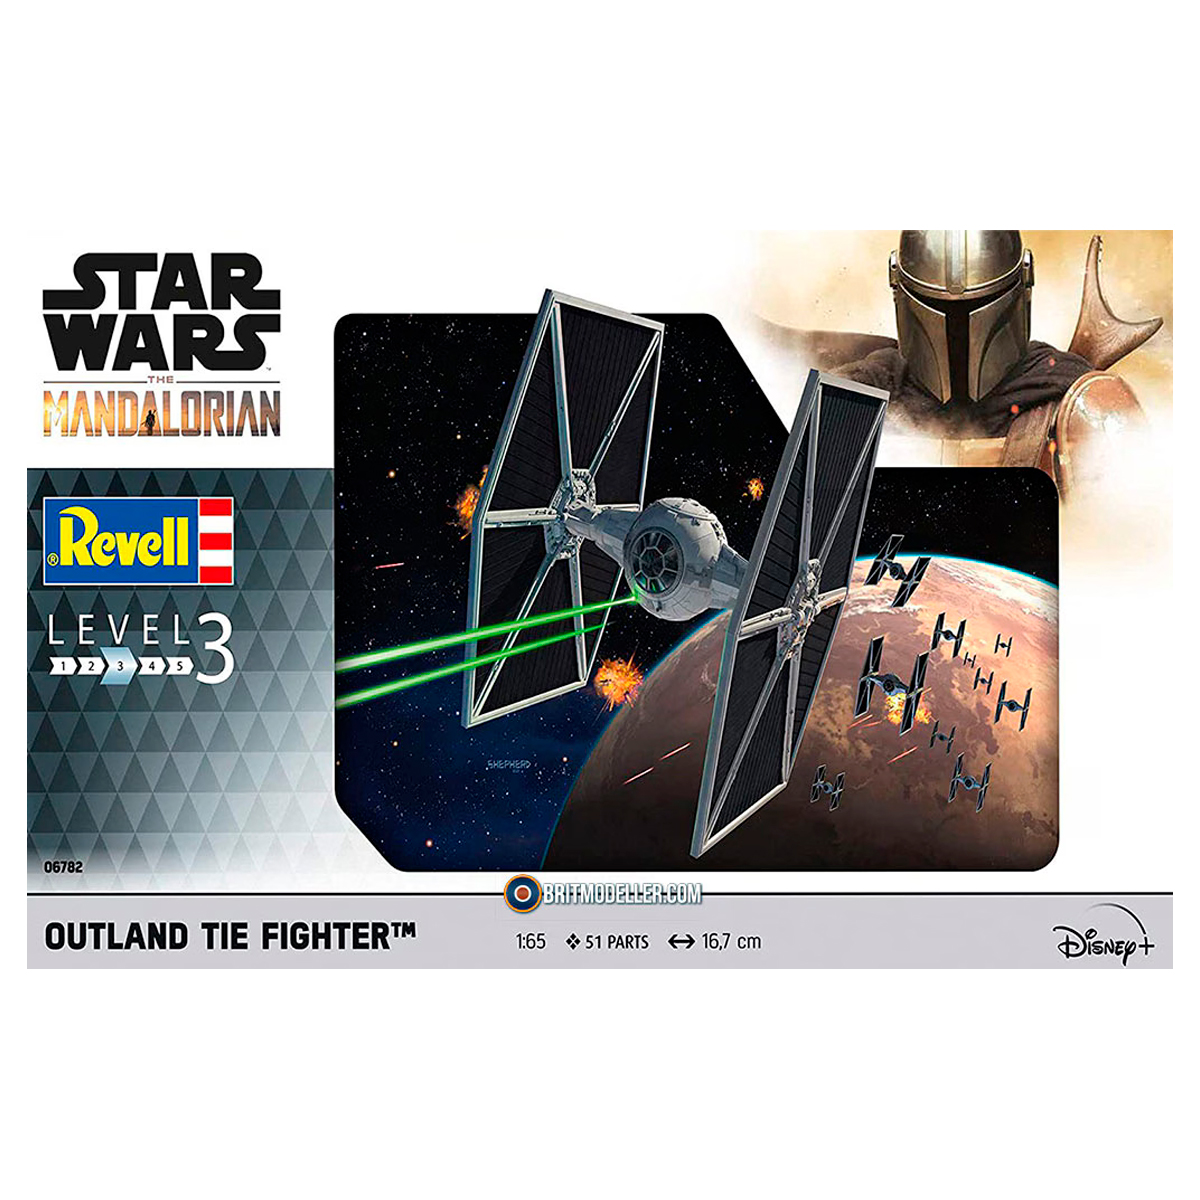 Outland TIE Fighter™: The Mandalorian 1/65